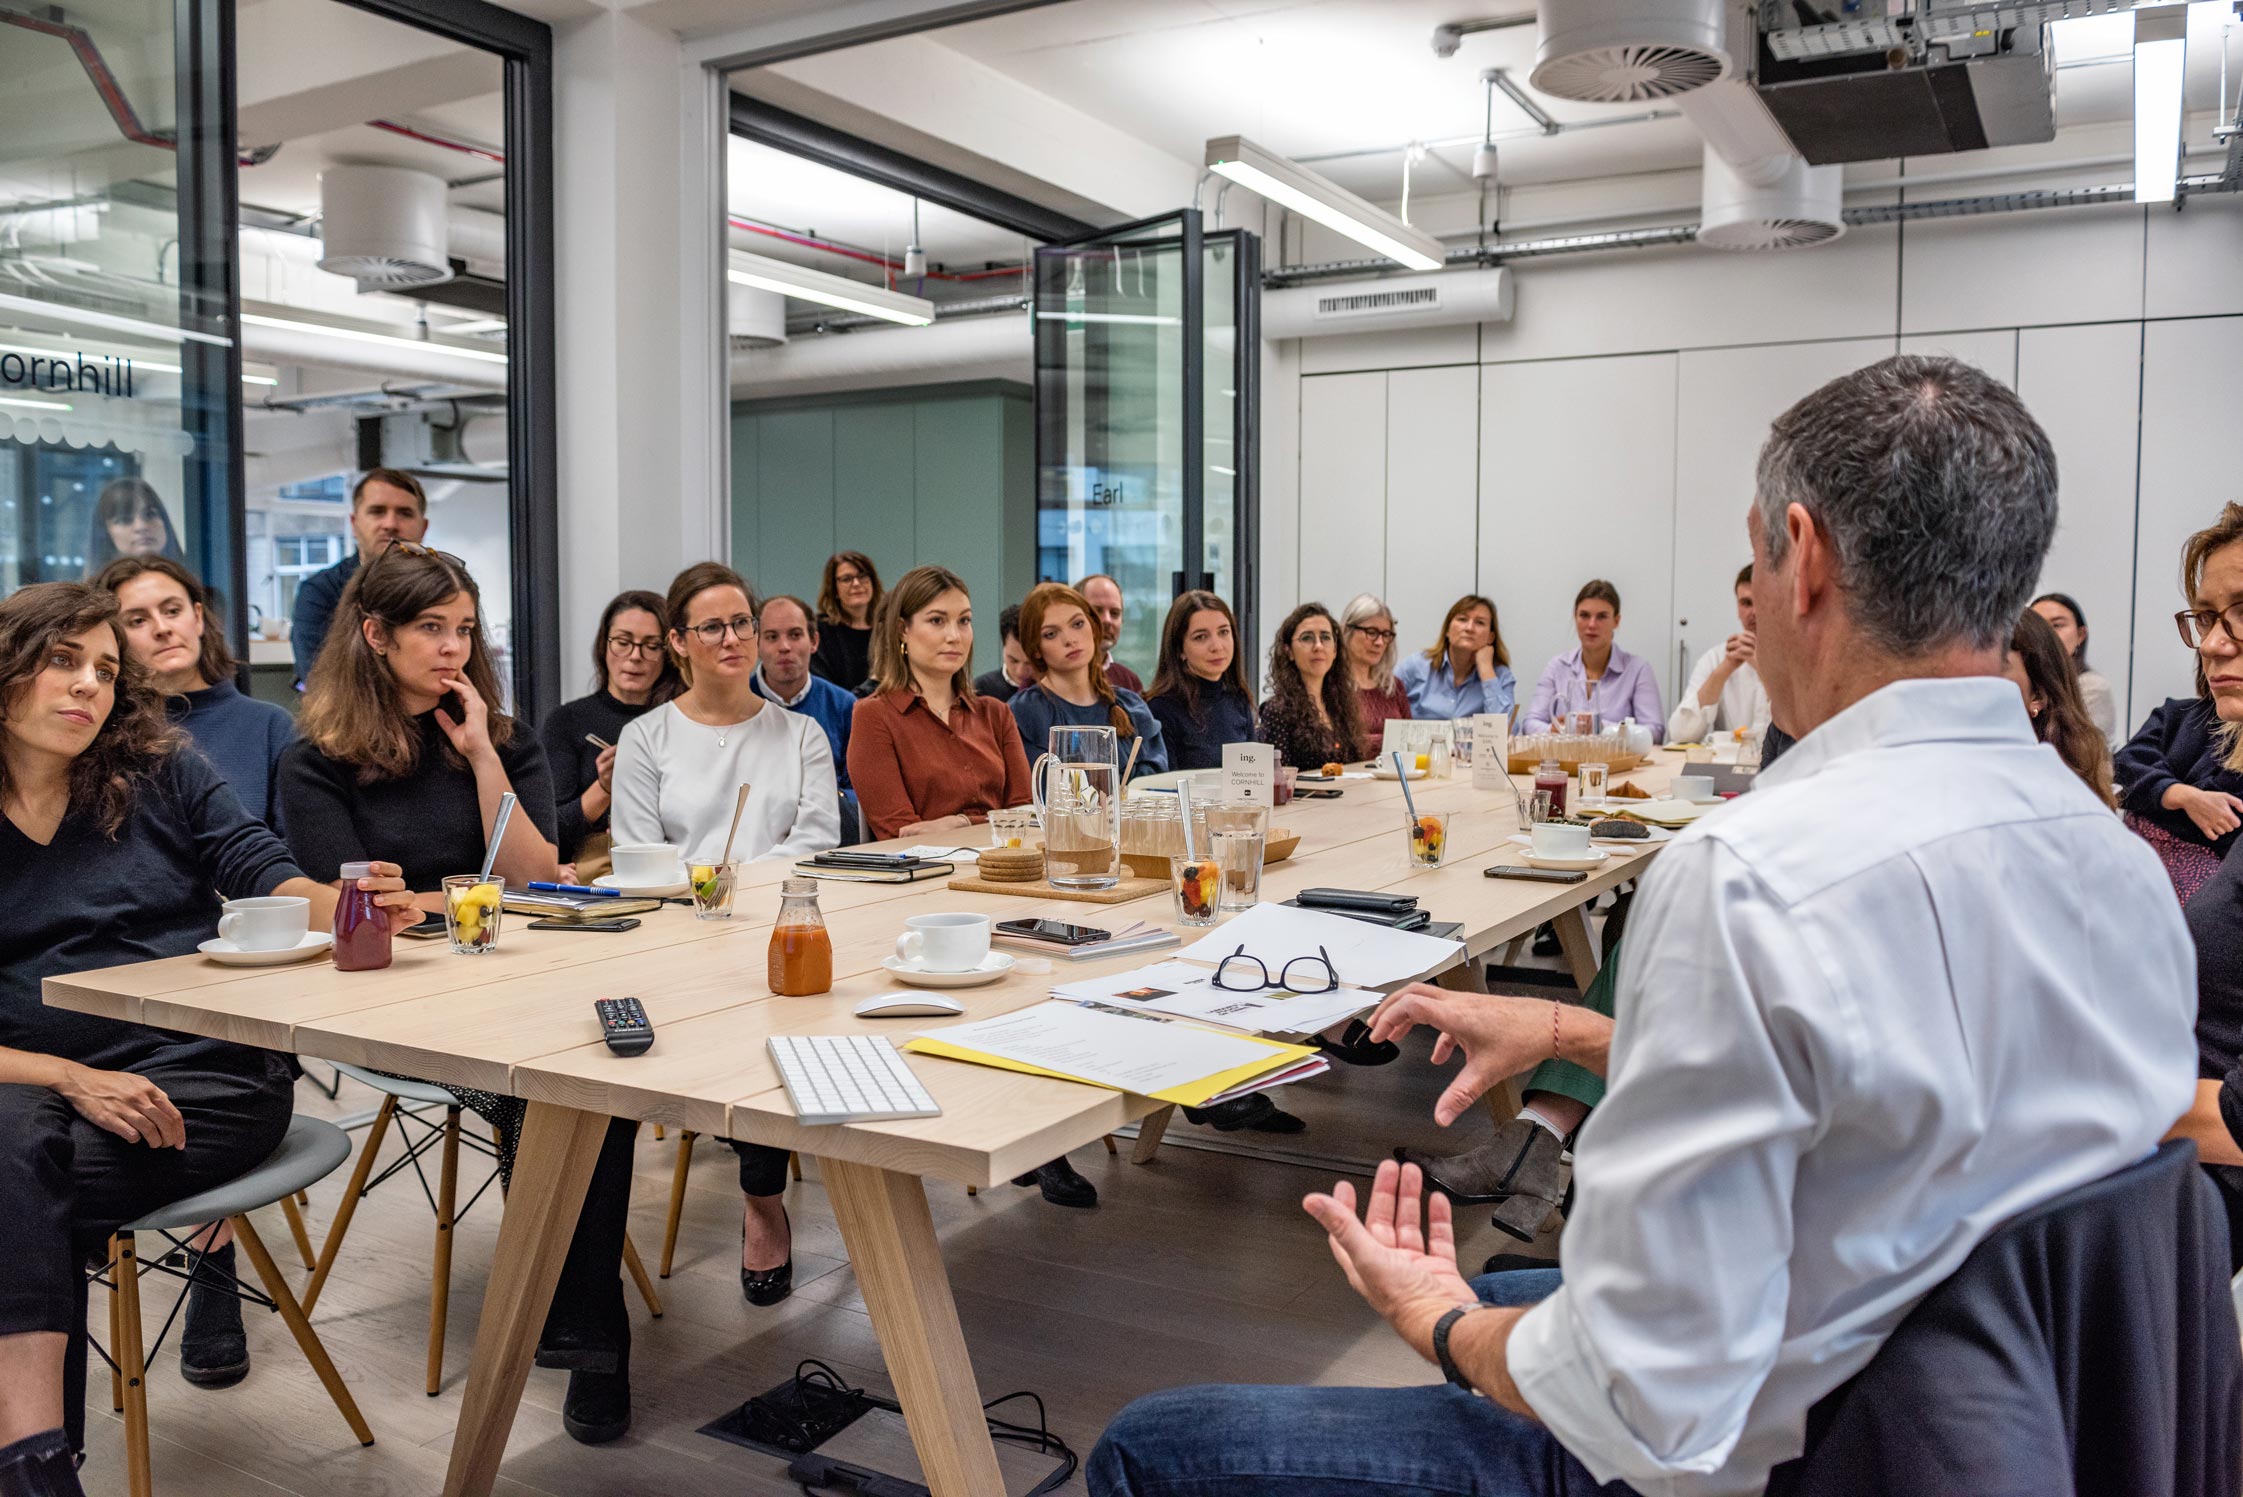 A different angle captures Moray MacLennan from M&C Saatchi Group giving a talk to professionals in a boardroom in Central London. Faces of the attentive audience are visible as they listen intently, captured in reportage style by Wright Content.